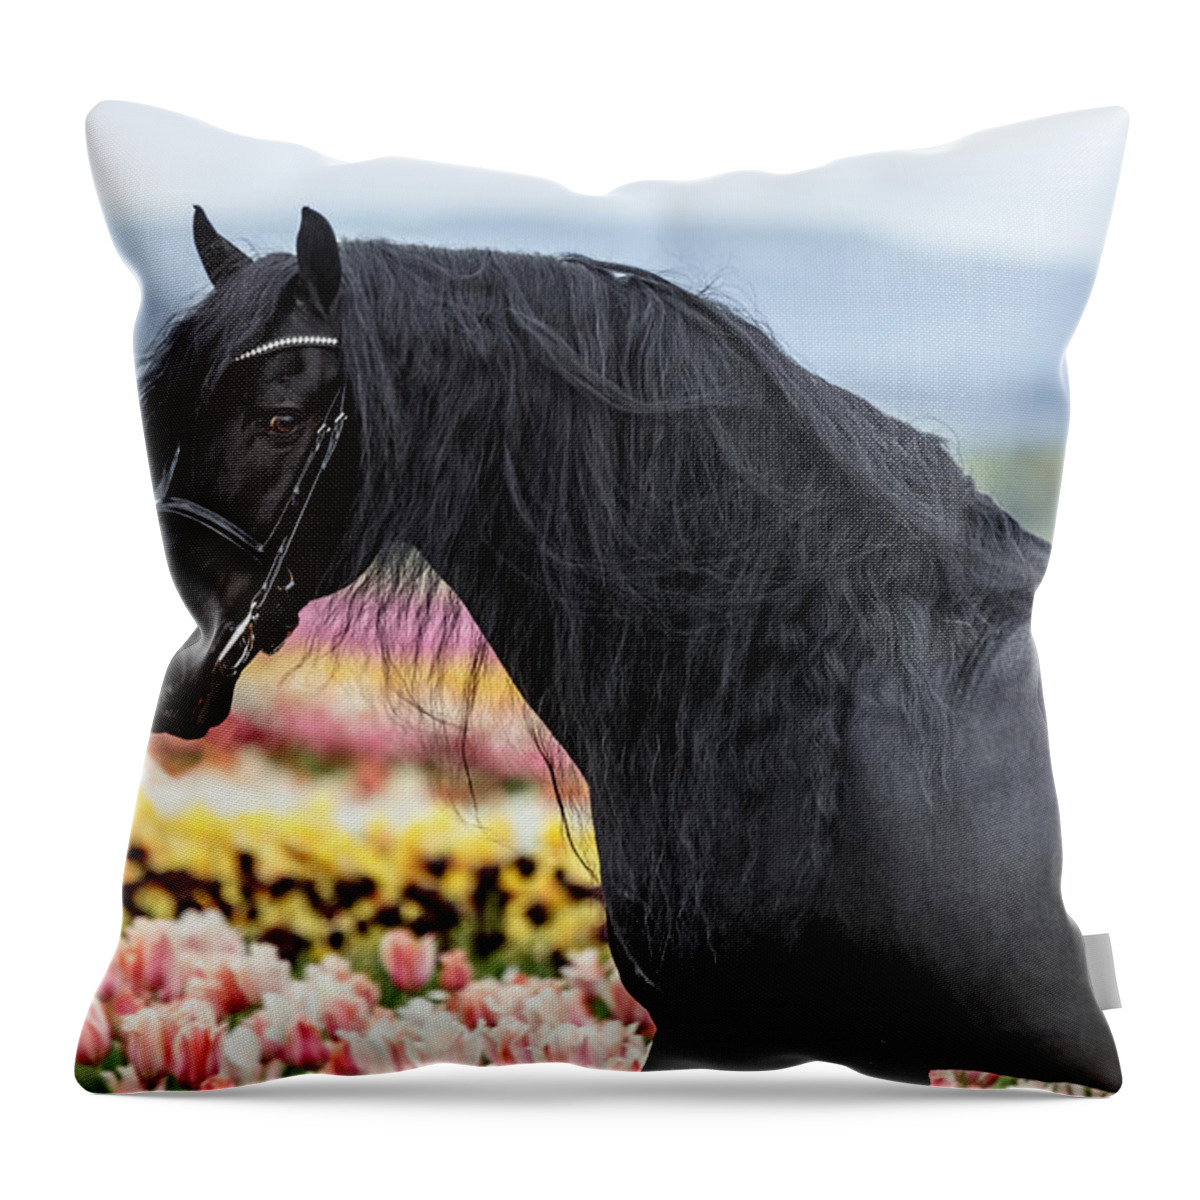 Deep In The Fields Throw Pillow featuring the photograph Deep In The Fields by Wes and Dotty Weber